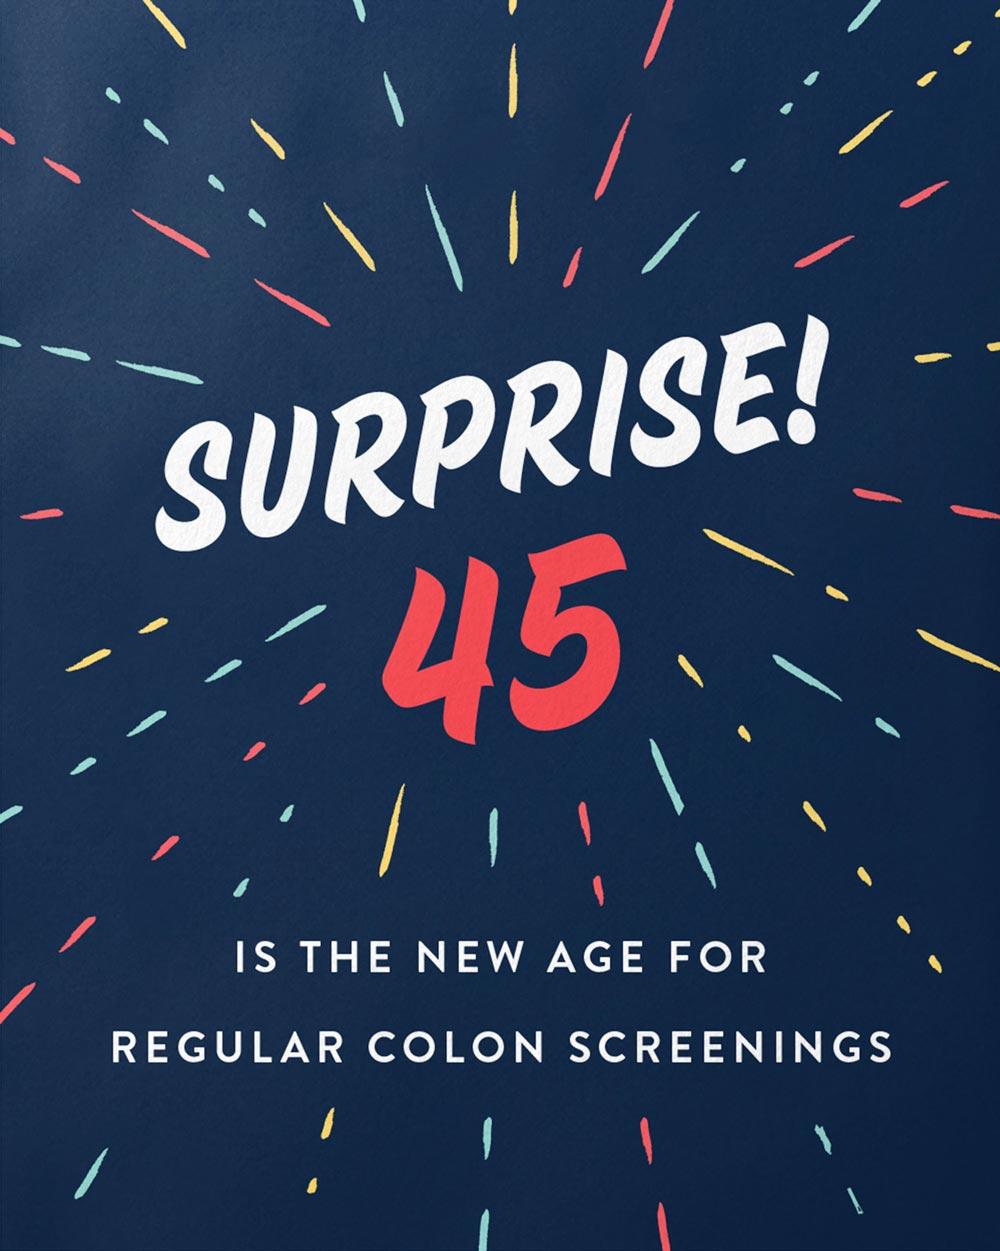 Surprise! 45 is the new age for regular colon screenings!